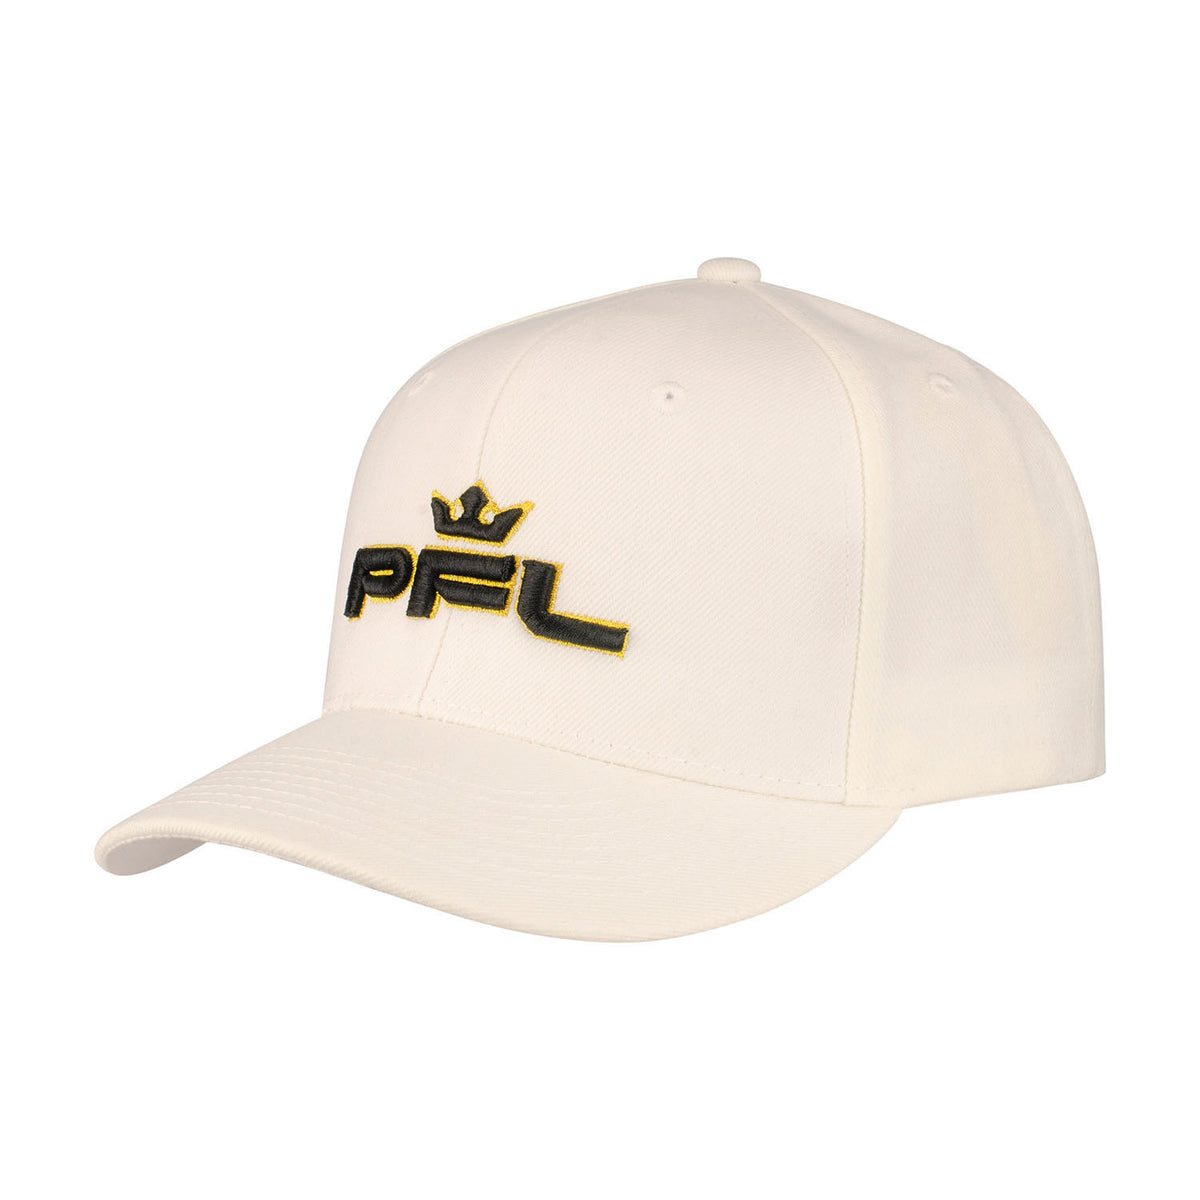 2021 PFL Championship Hat in White - Left Side View